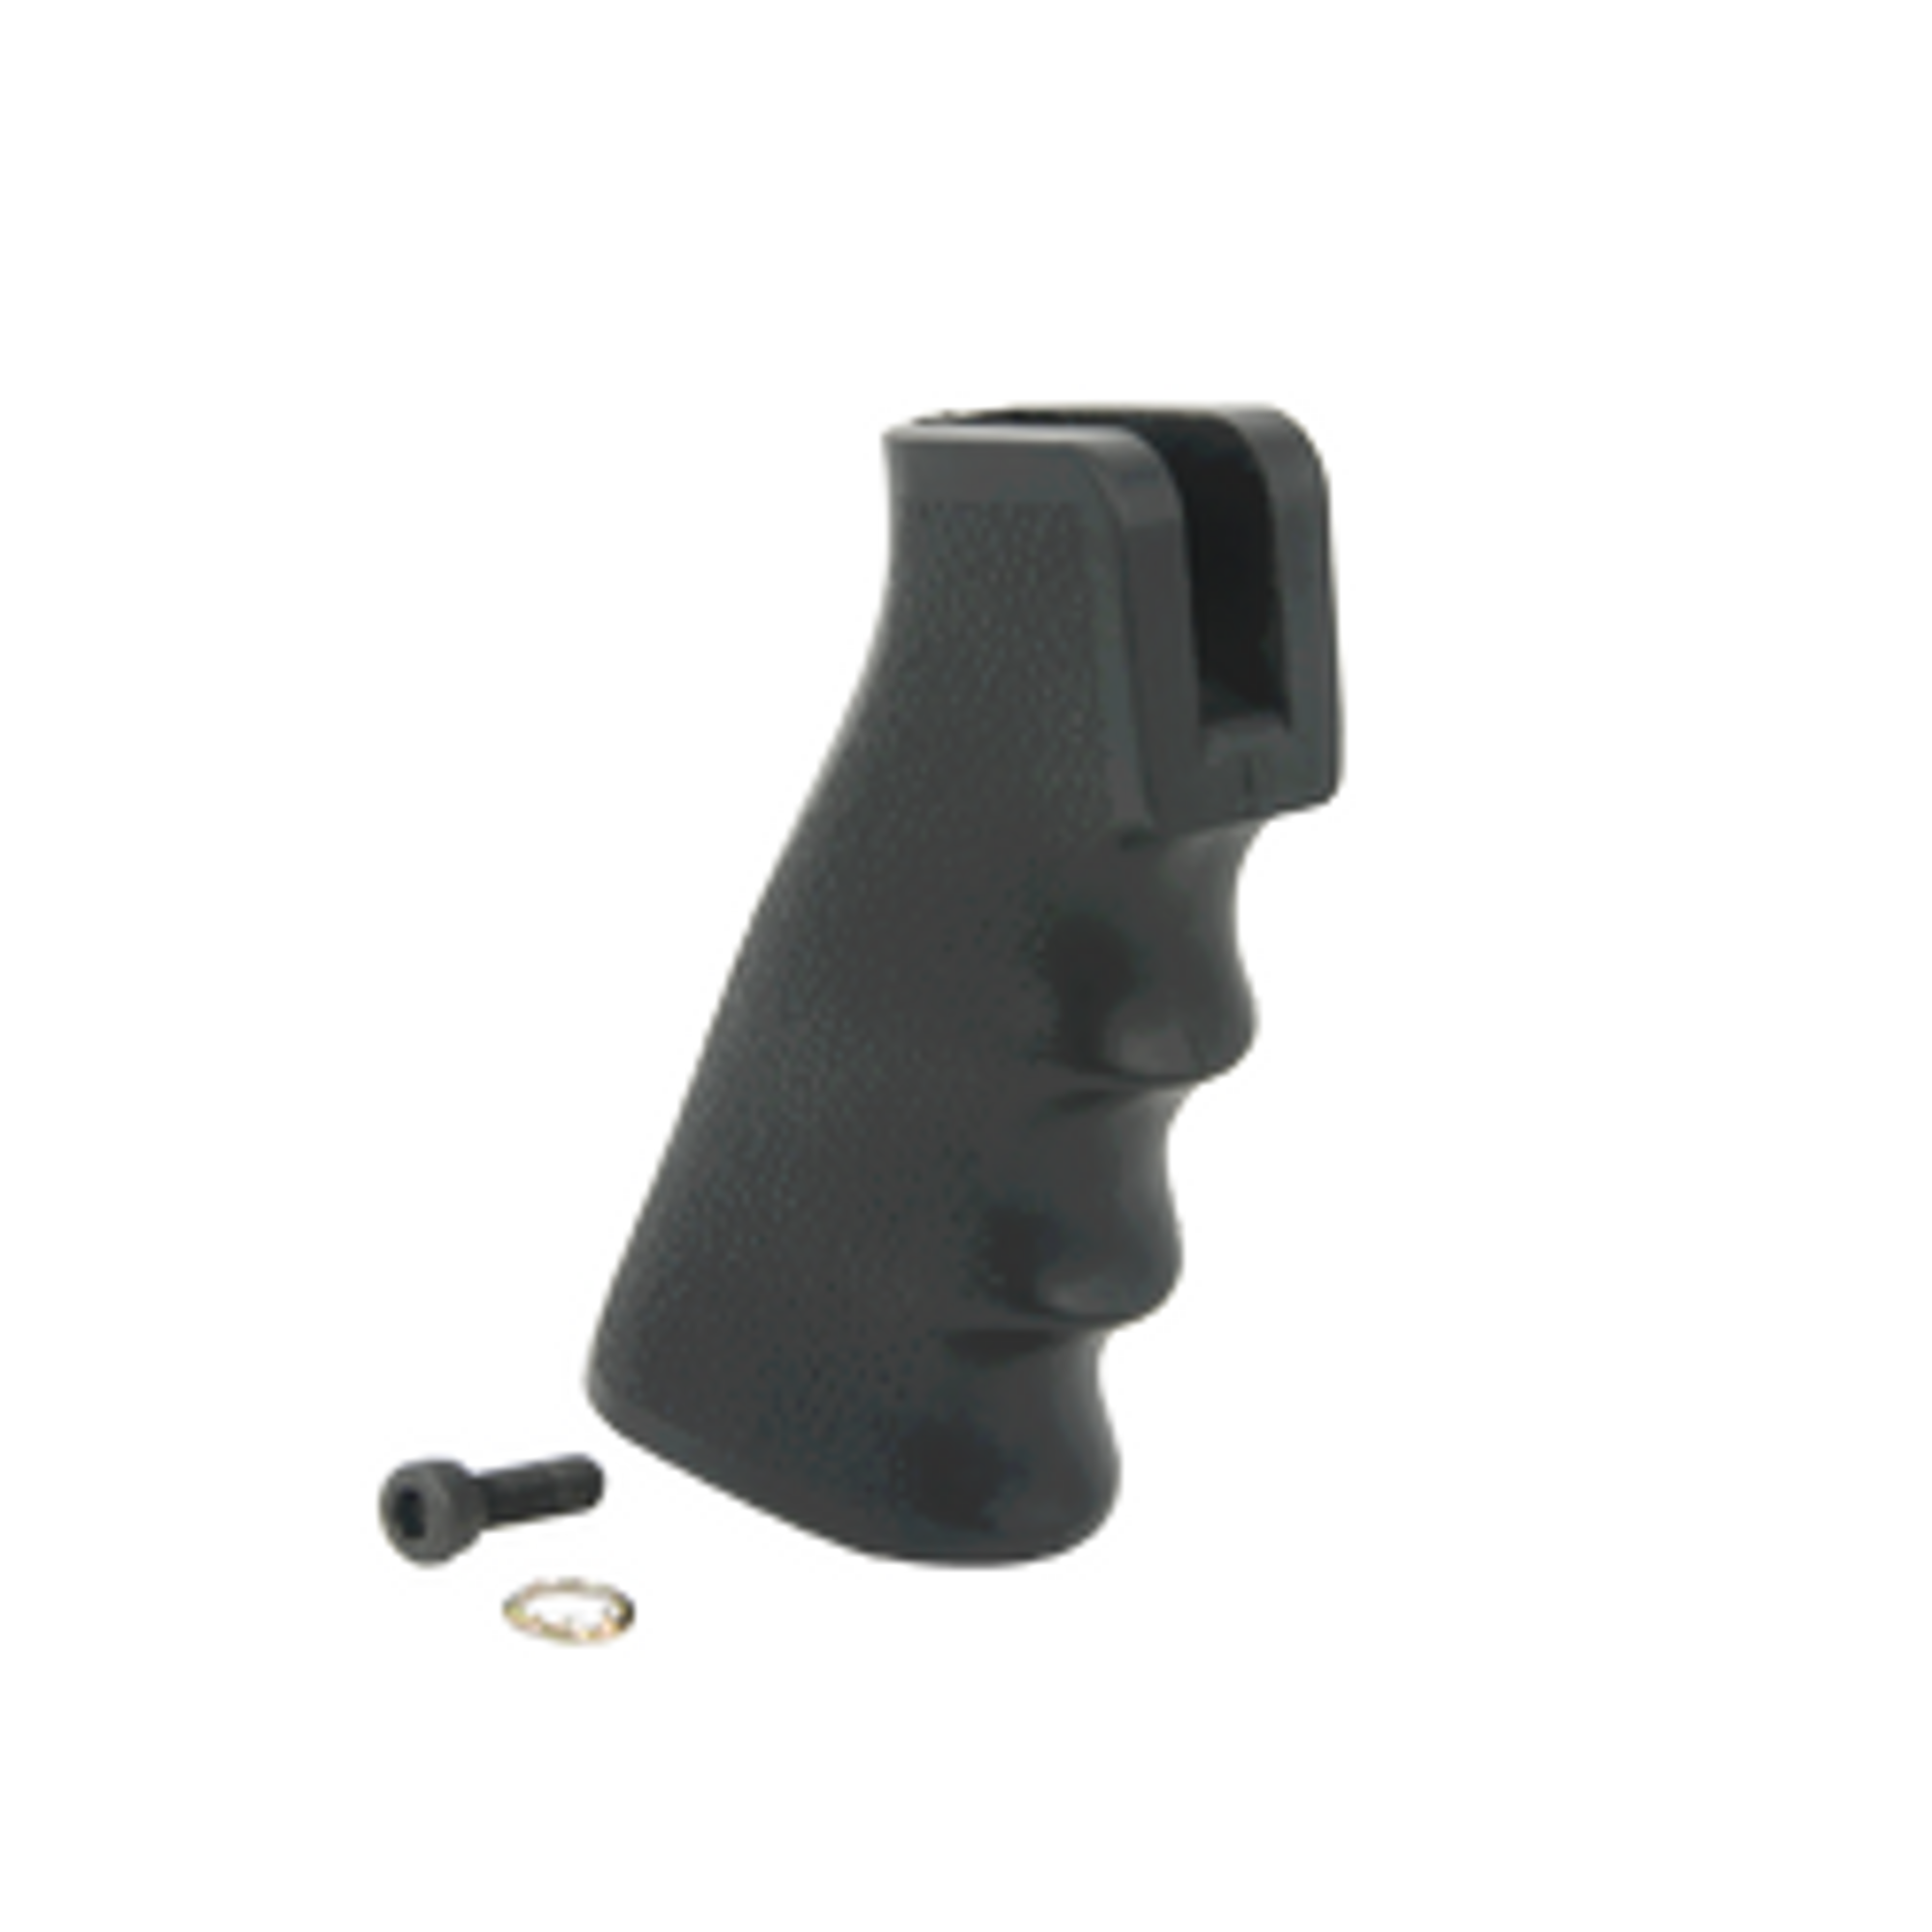 M4/16 Tactical Rifle Grip for GBBR - Black